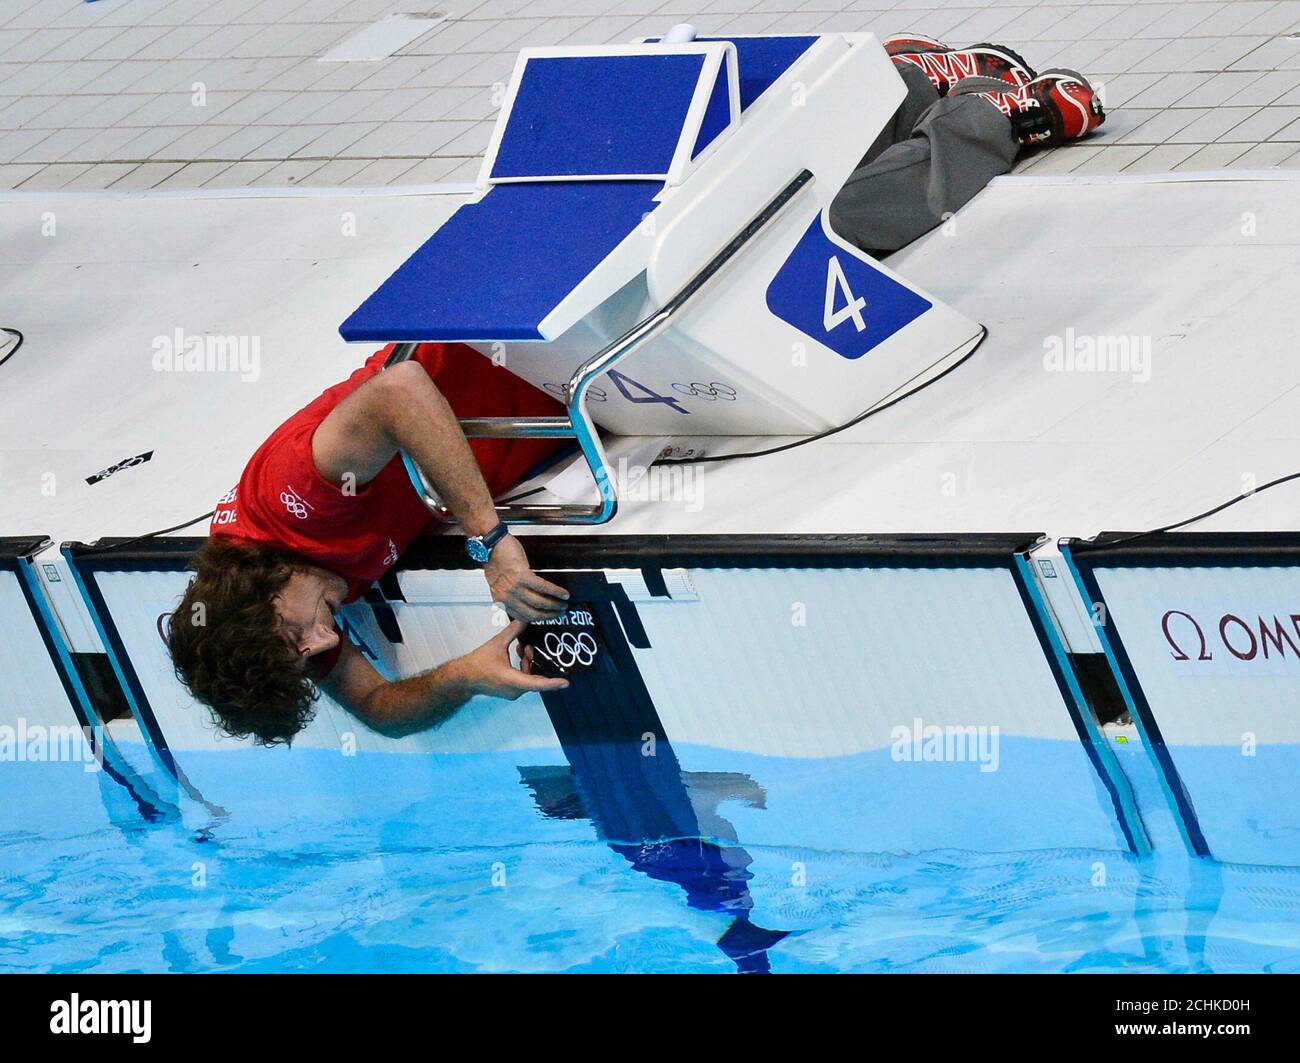 A Technician Attaches A Sticker Bearing The Rings Of The Olympic Logo On The Wall Of A Pool Lane At The Main Pool Of The Aquatics Centre Before The Start Of The